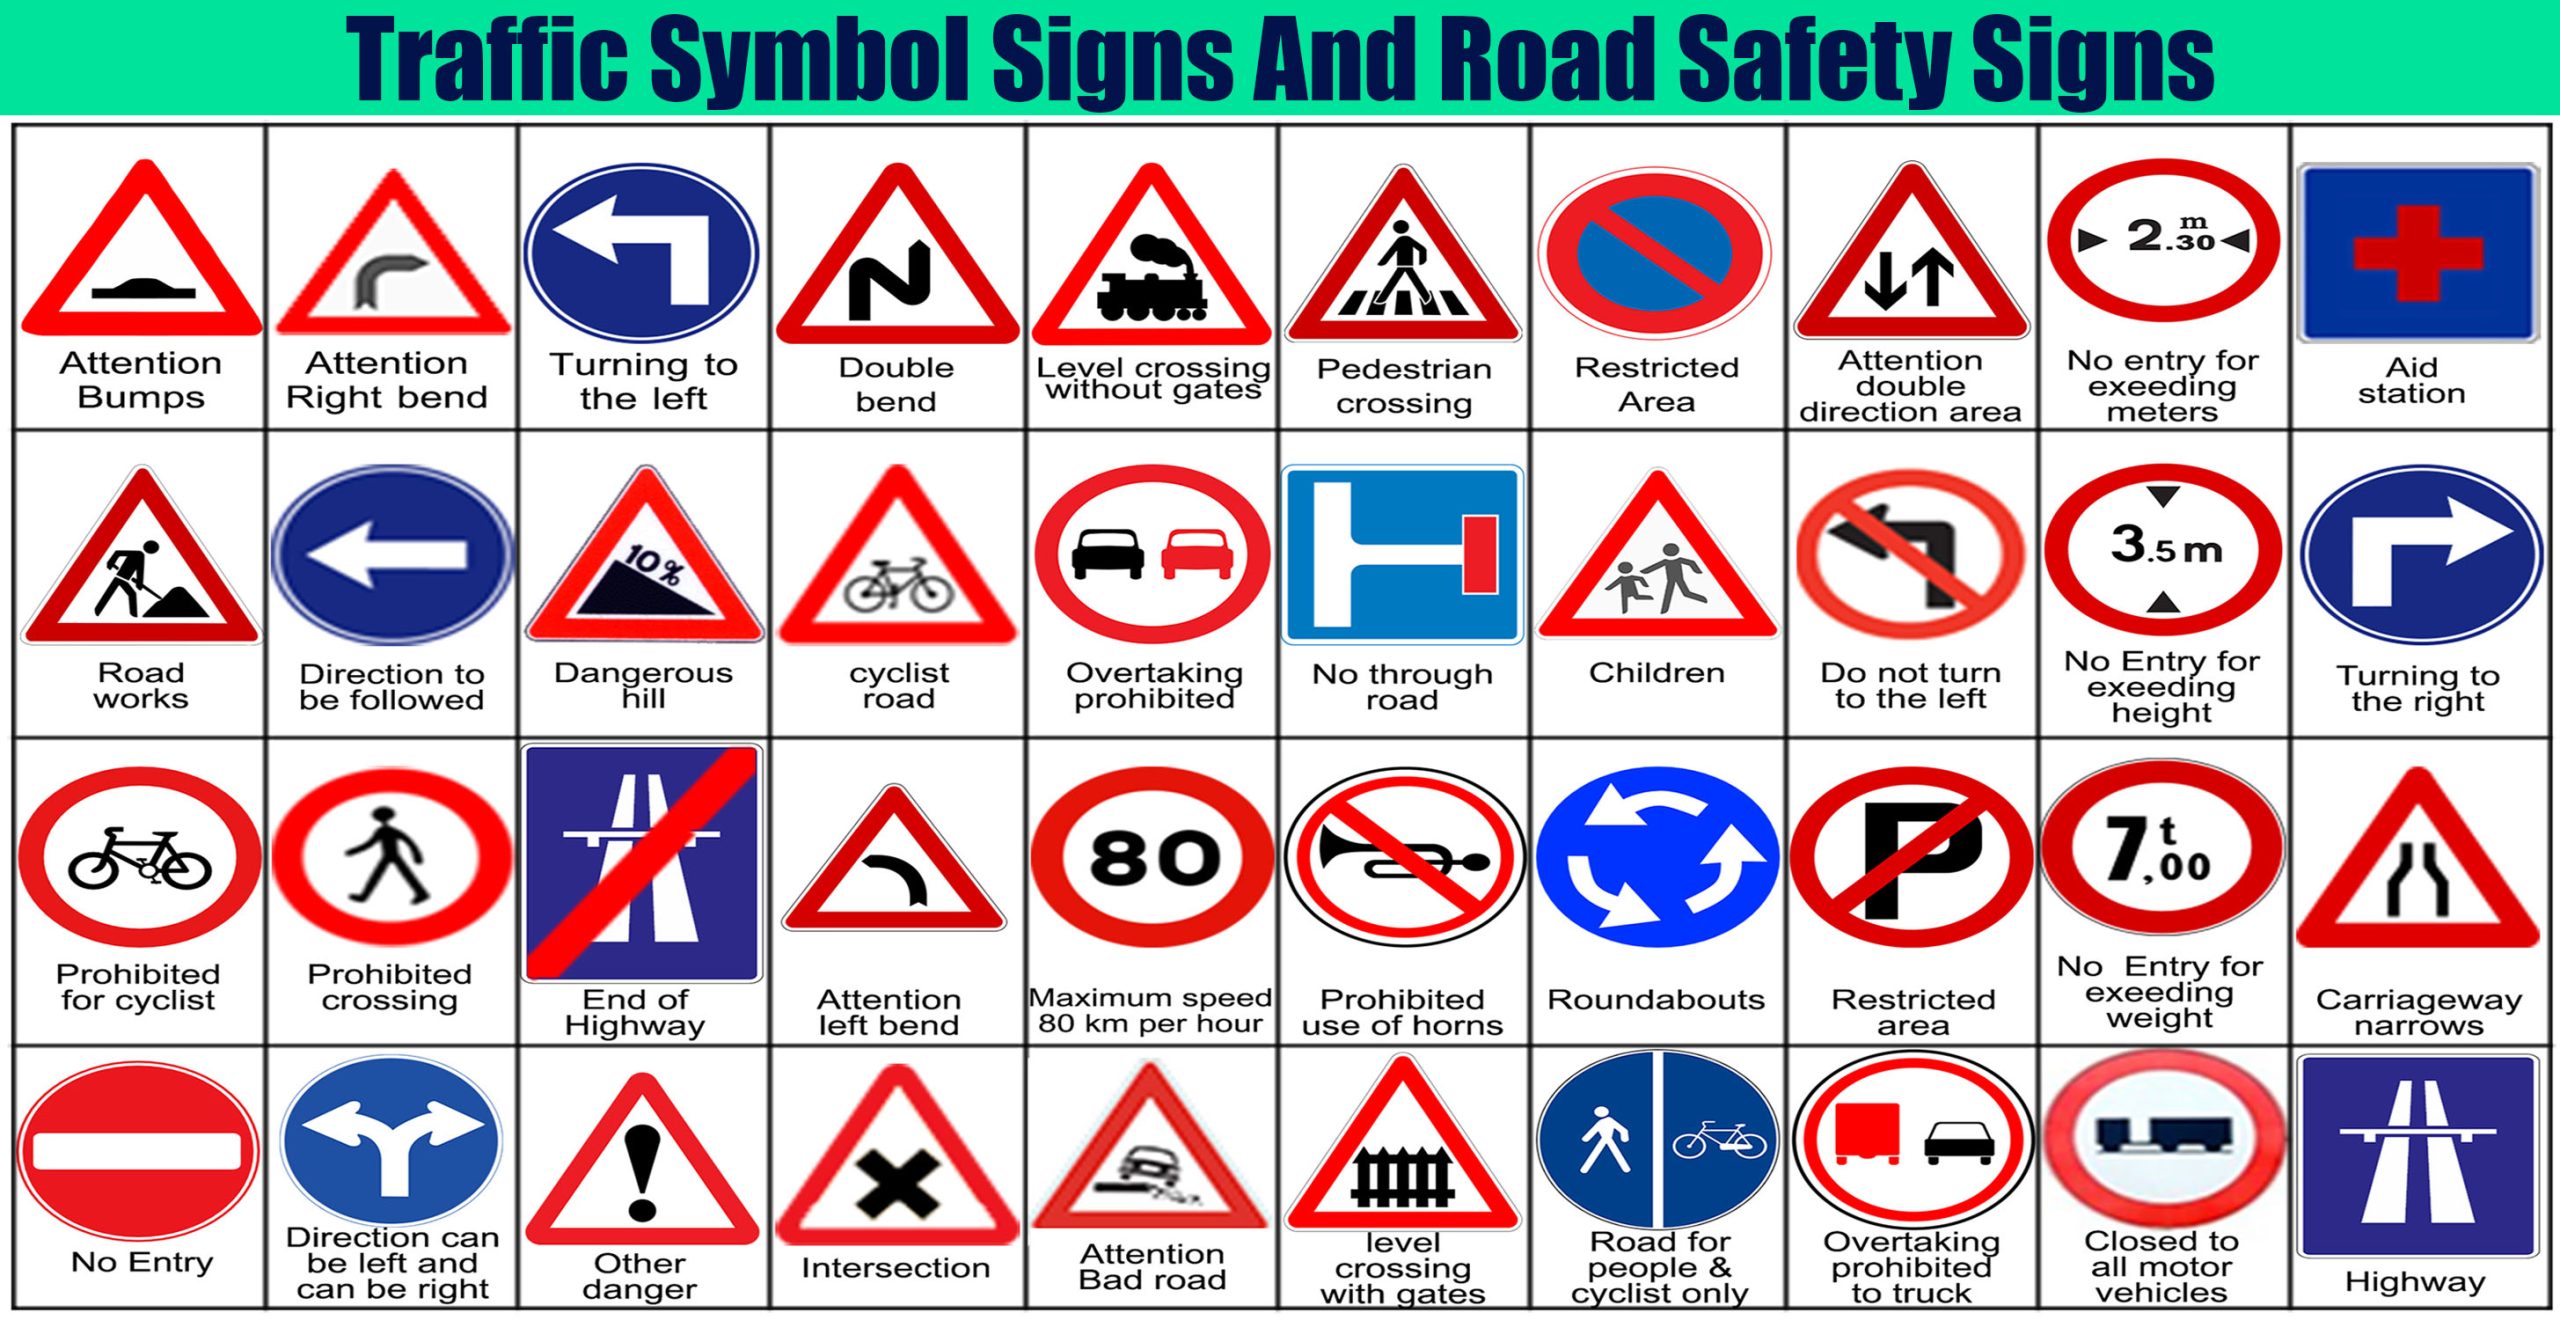 traffic-symbol-signs-and-road-safety-signs-engineering-discoveries